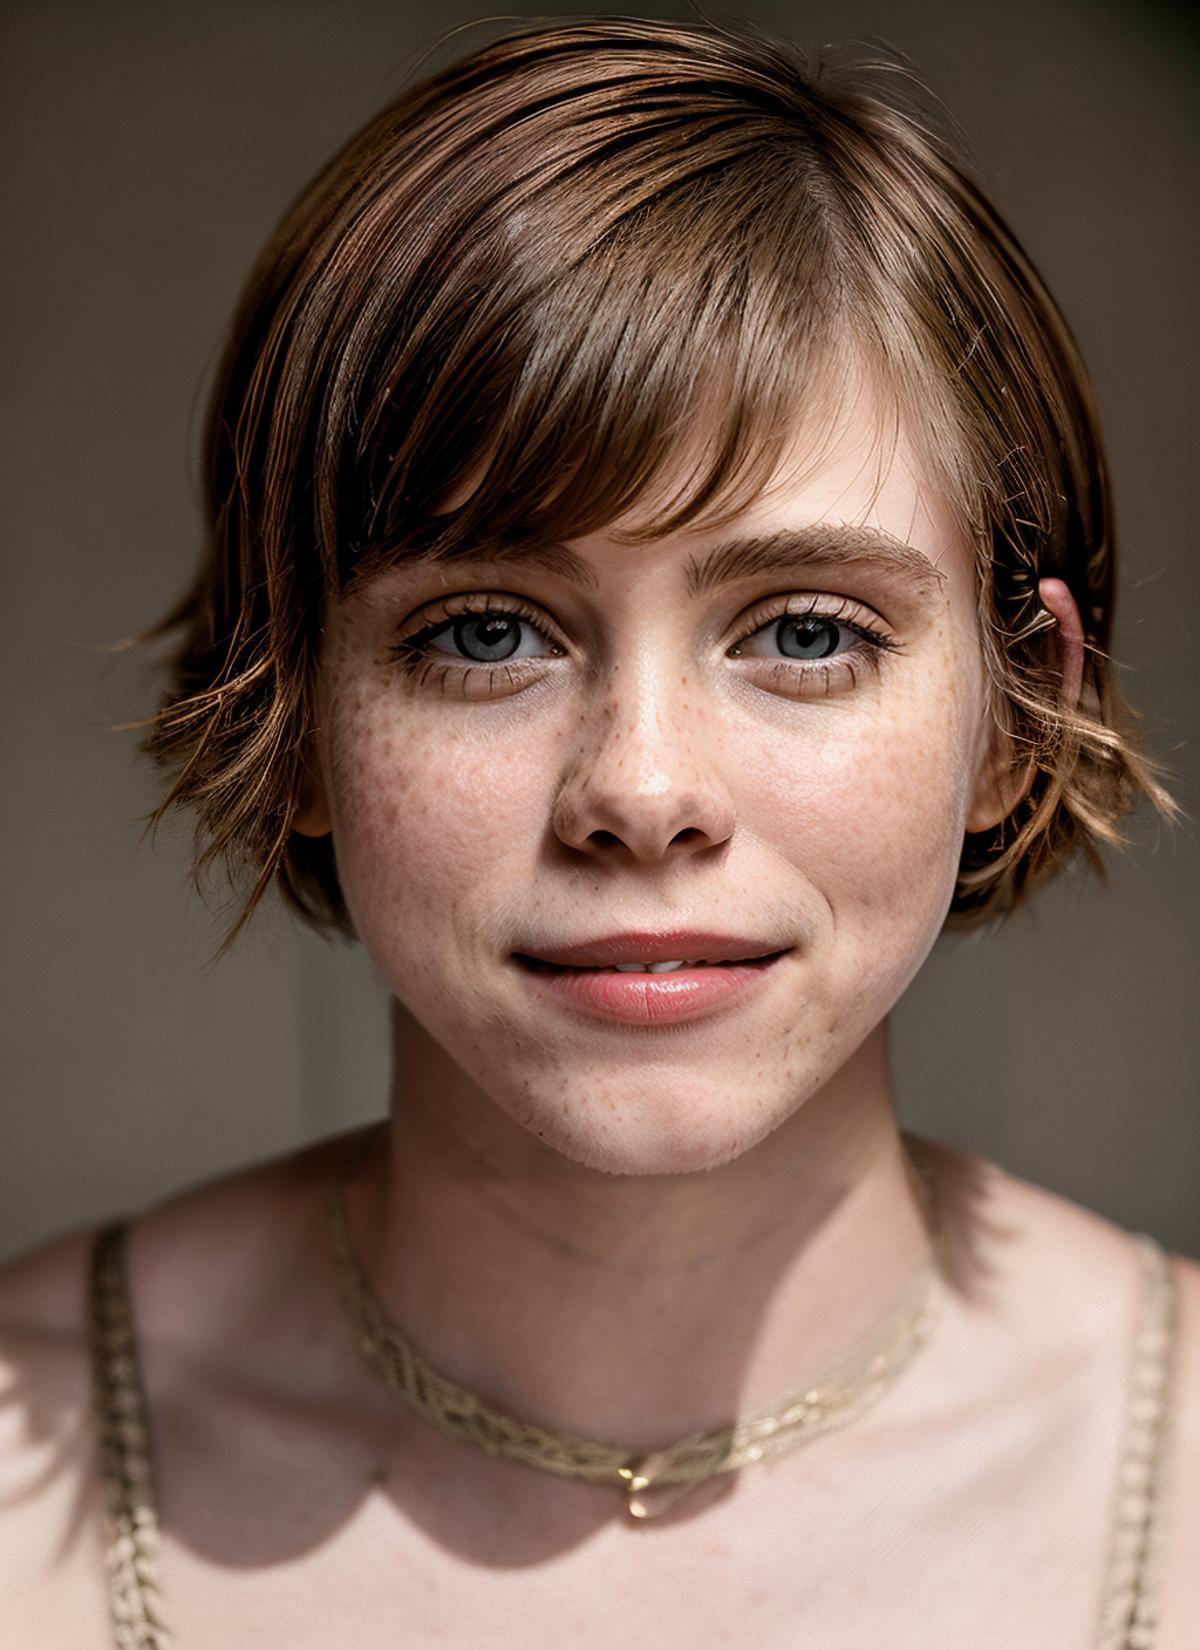 Sophia Lillis (Beverly Marsh on It & Dorec on Dungeons & Dragons: Honor Among Thieves movies) image by astragartist